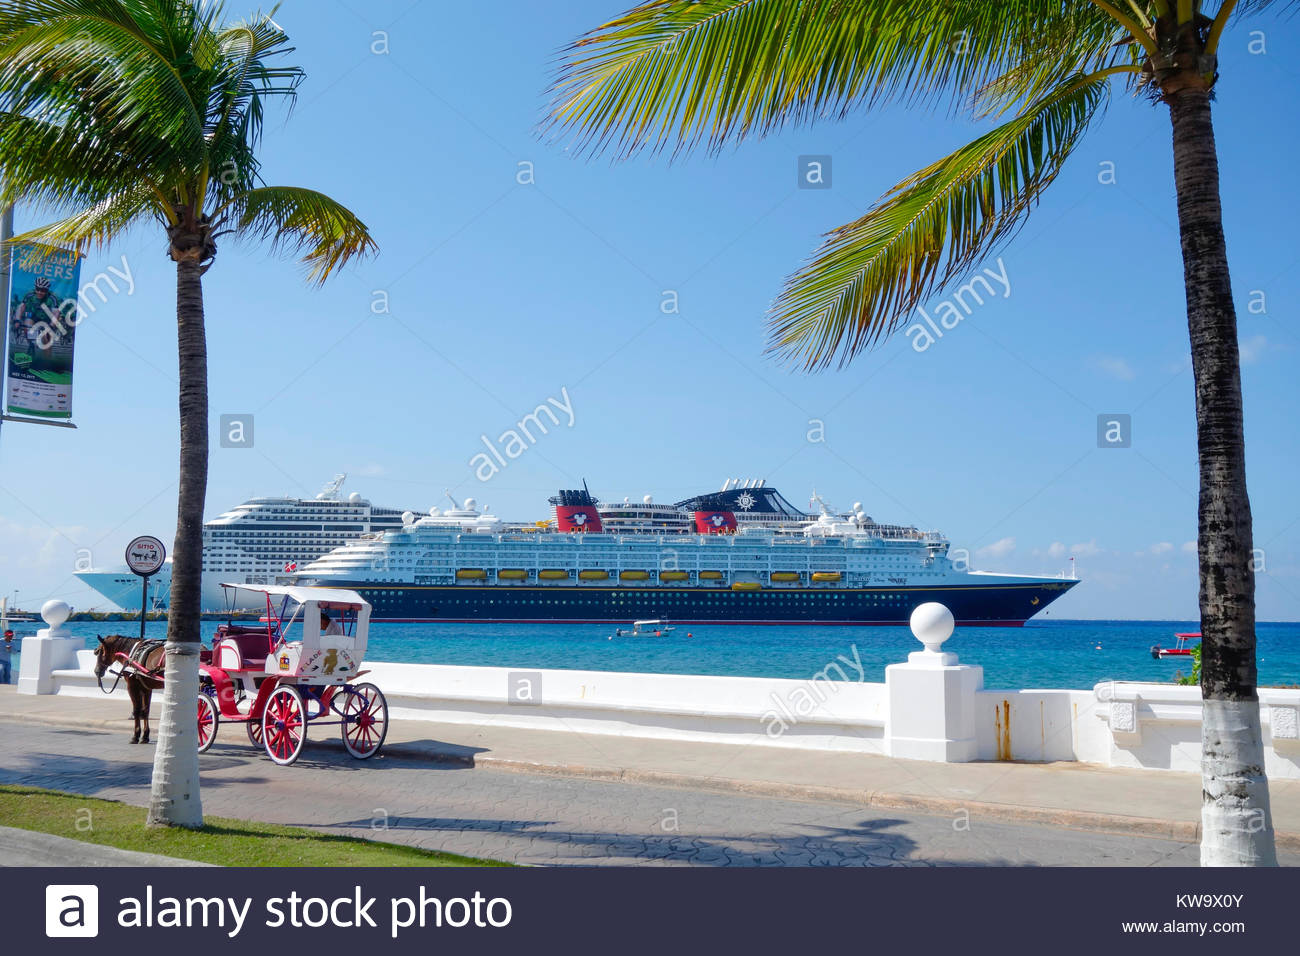 Cozumel Mexico Horse And Carriage With Cruise Ship In The Stock